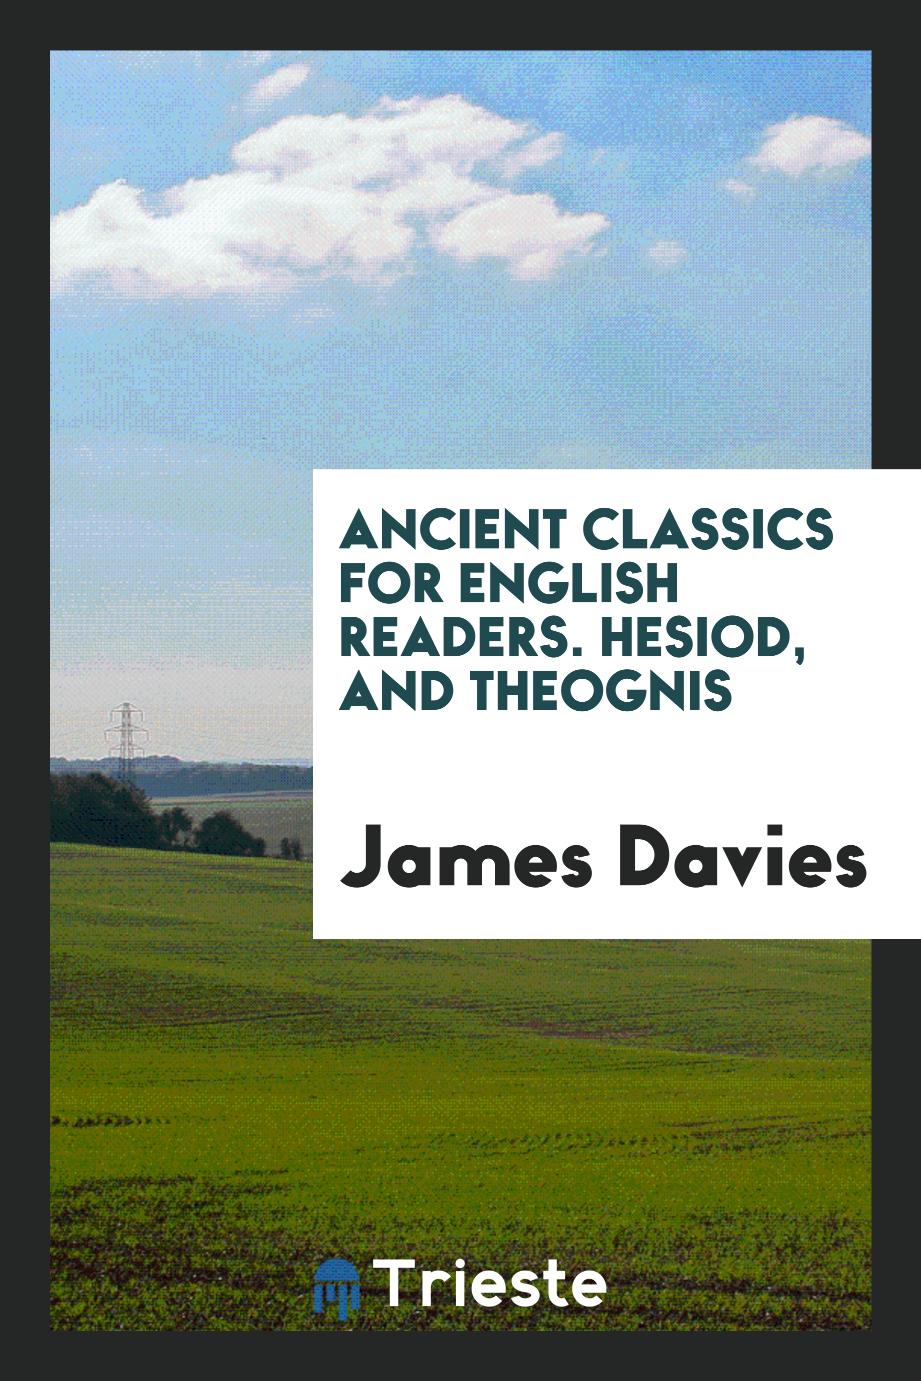 Ancient Classics for English Readers. Hesiod, and Theognis